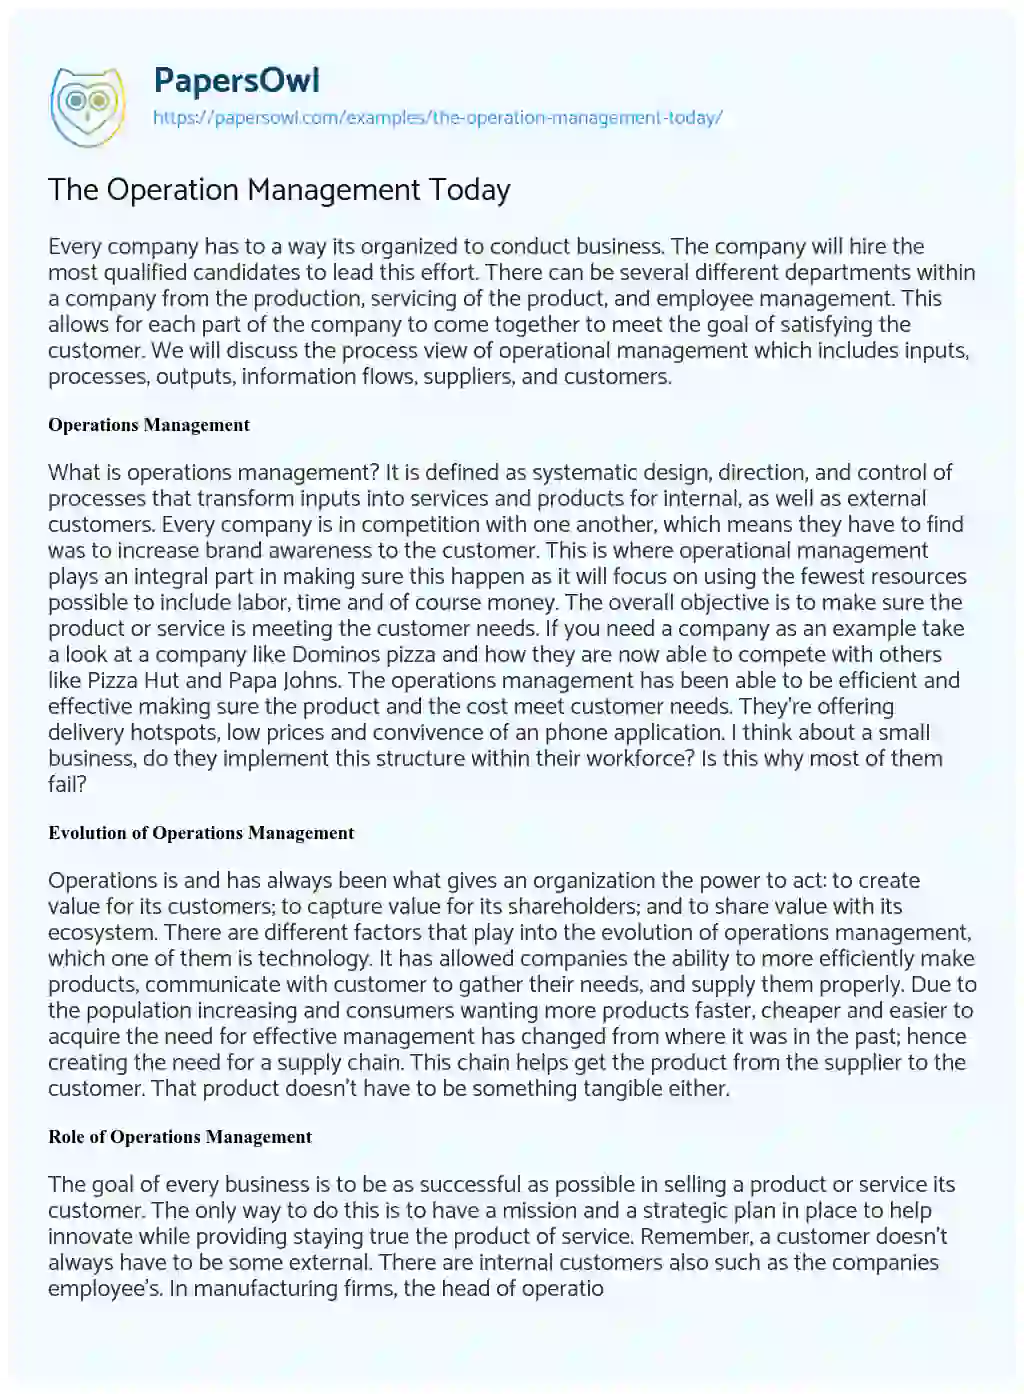 The Operation Management Today essay